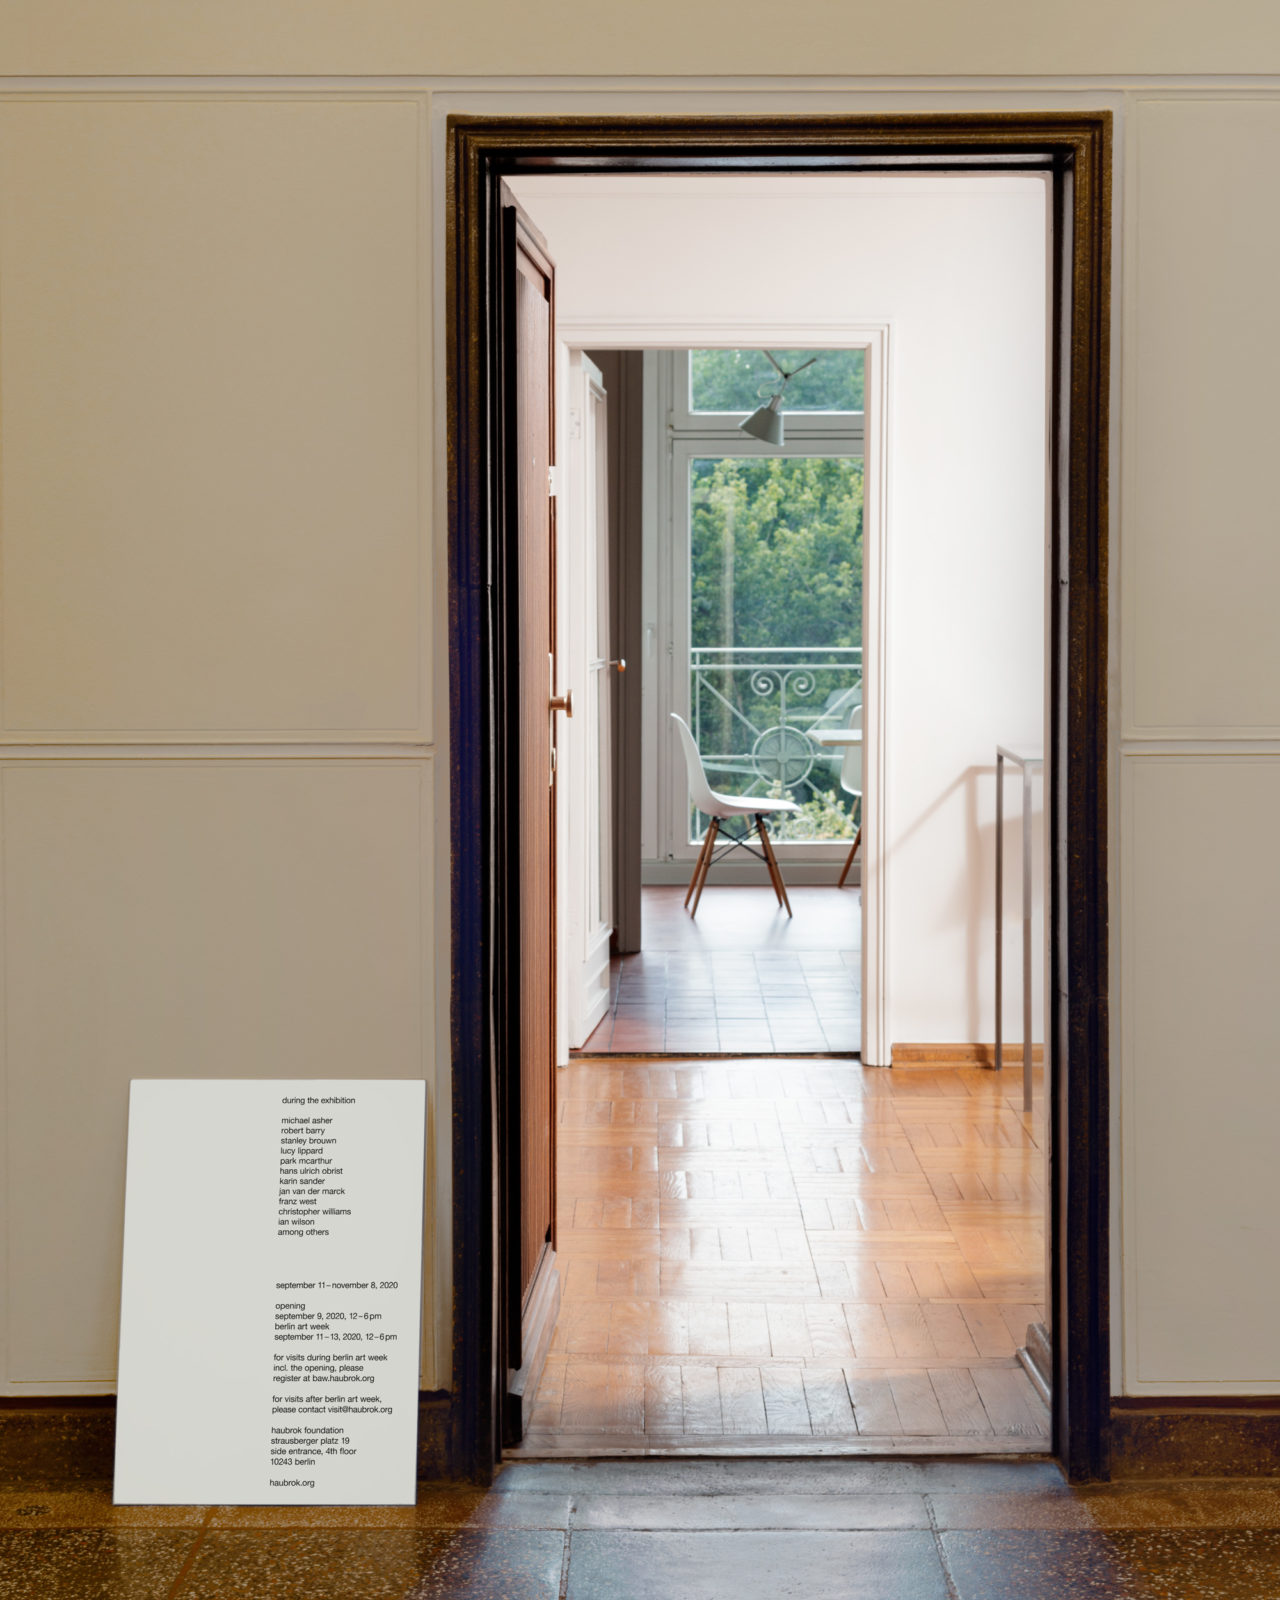 during the exhibition, Installation view